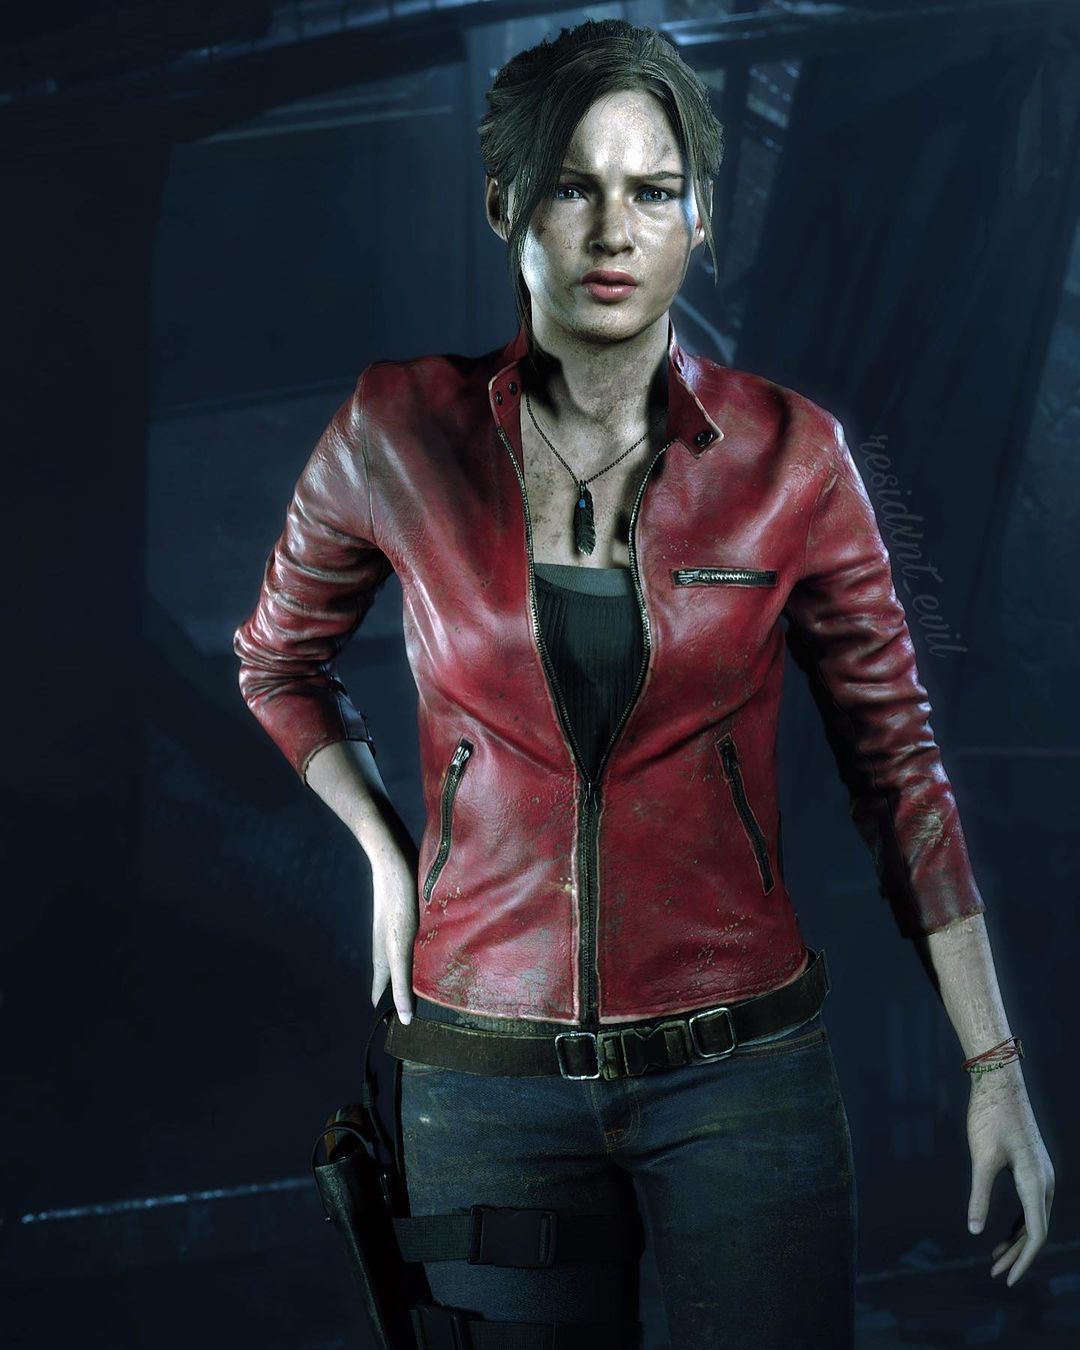 Cosplay: Claire Redfield. #claireredfield #capcom #residentevil2